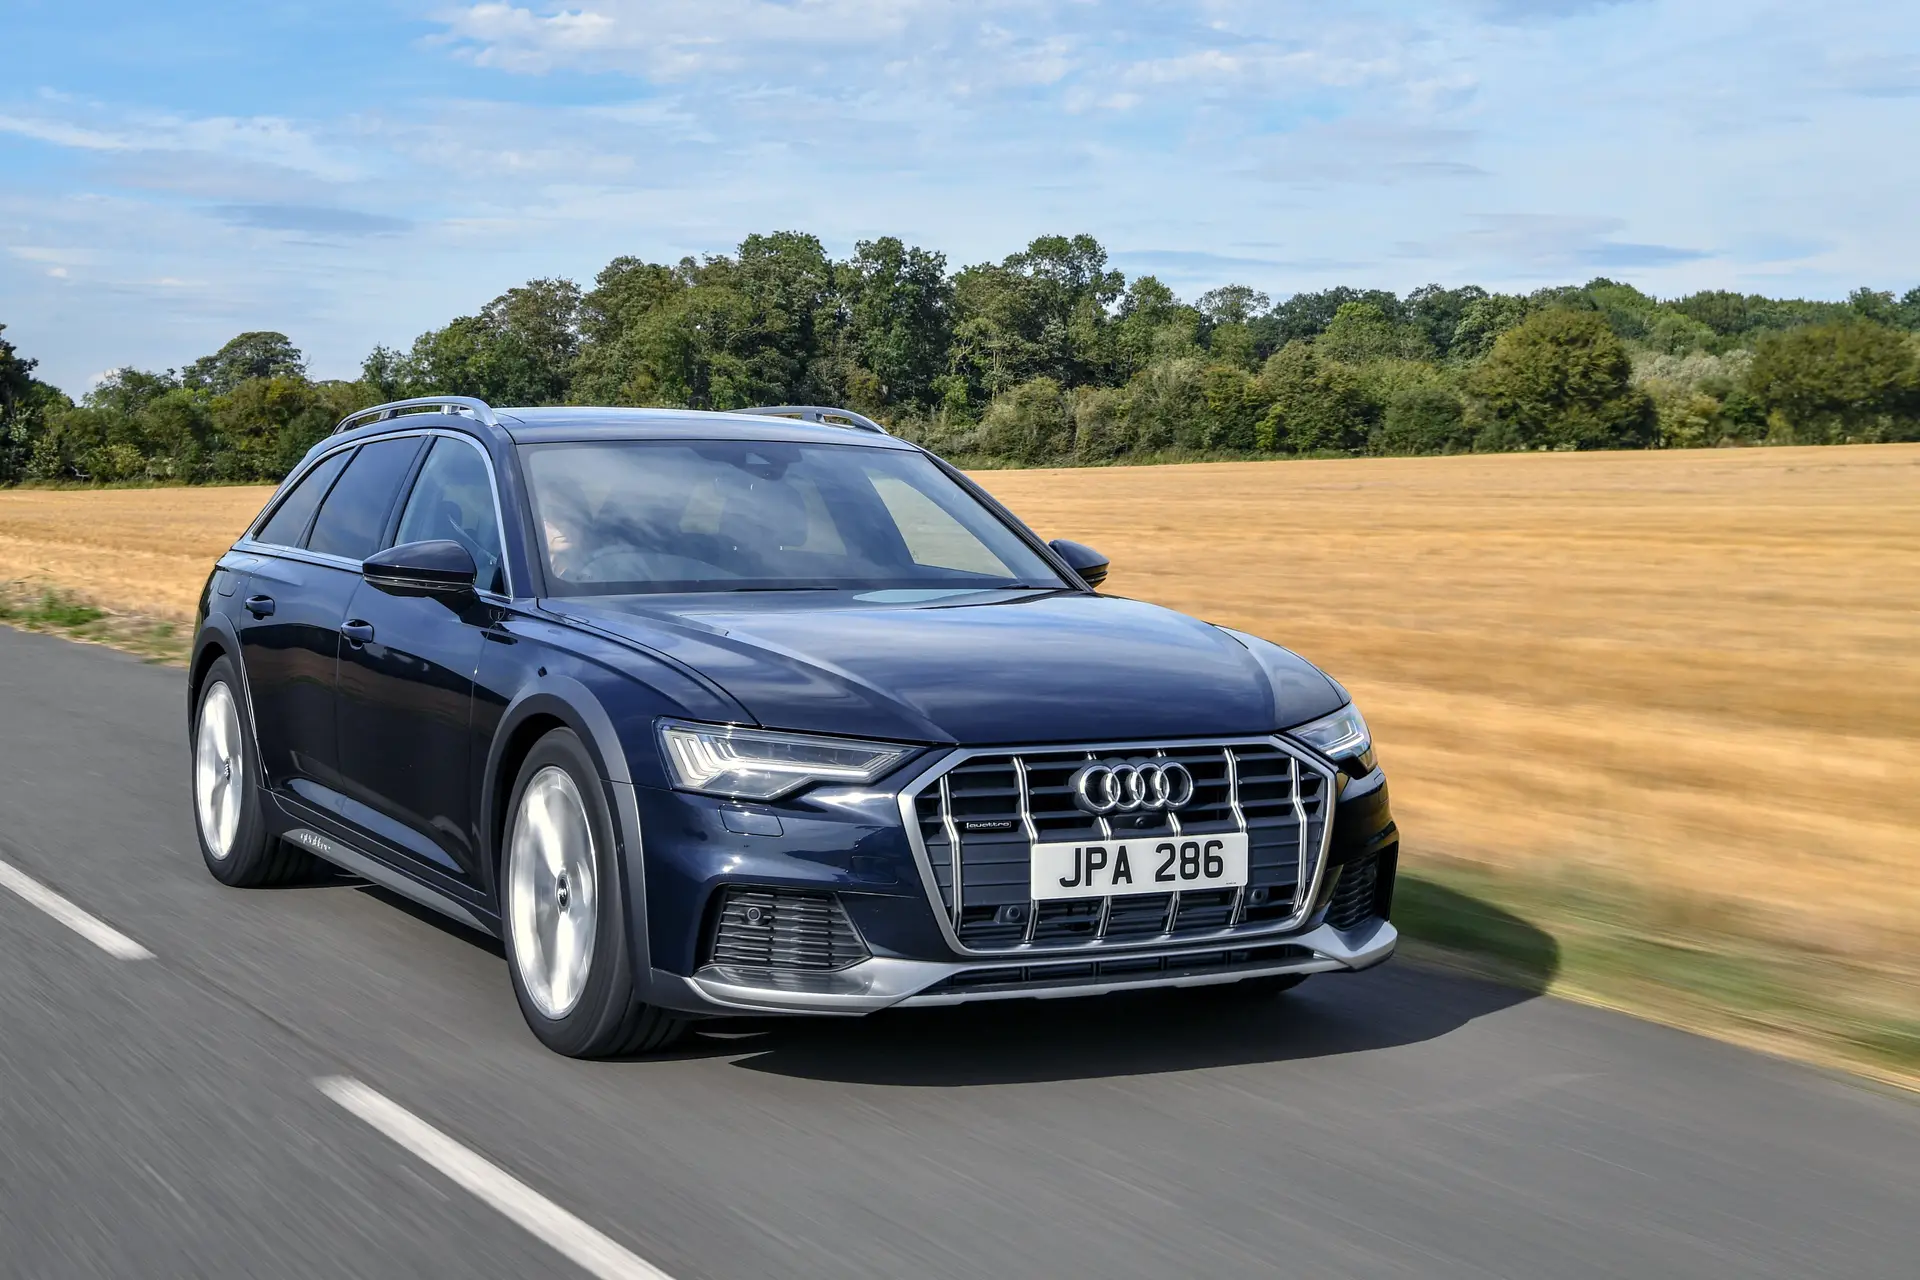 Audi A6 Allroad Review 2023: exterior front three quarter photo of the Audi A6 Allroad on the road